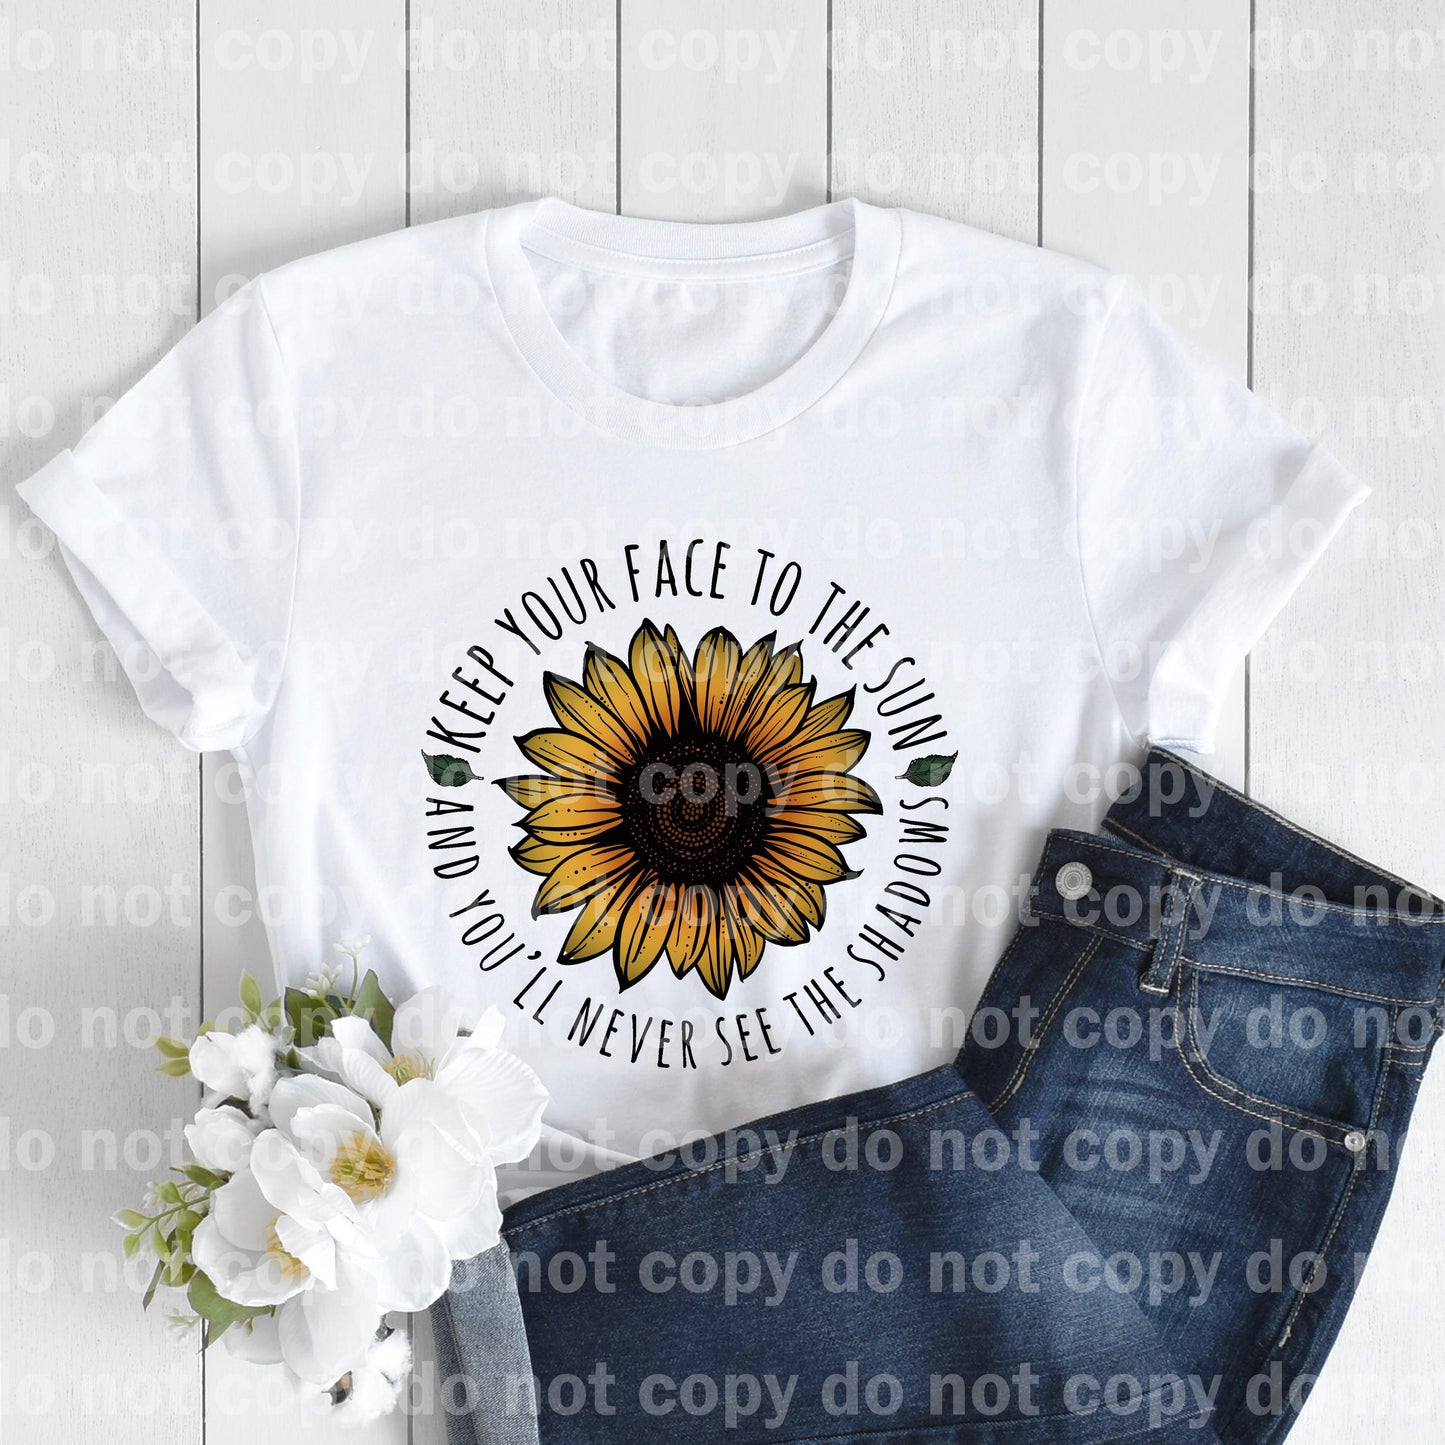 Keep Your Face To The Sun And You'll Never See The Shadows Full Color/One Color Dream Print or Sublimation Print